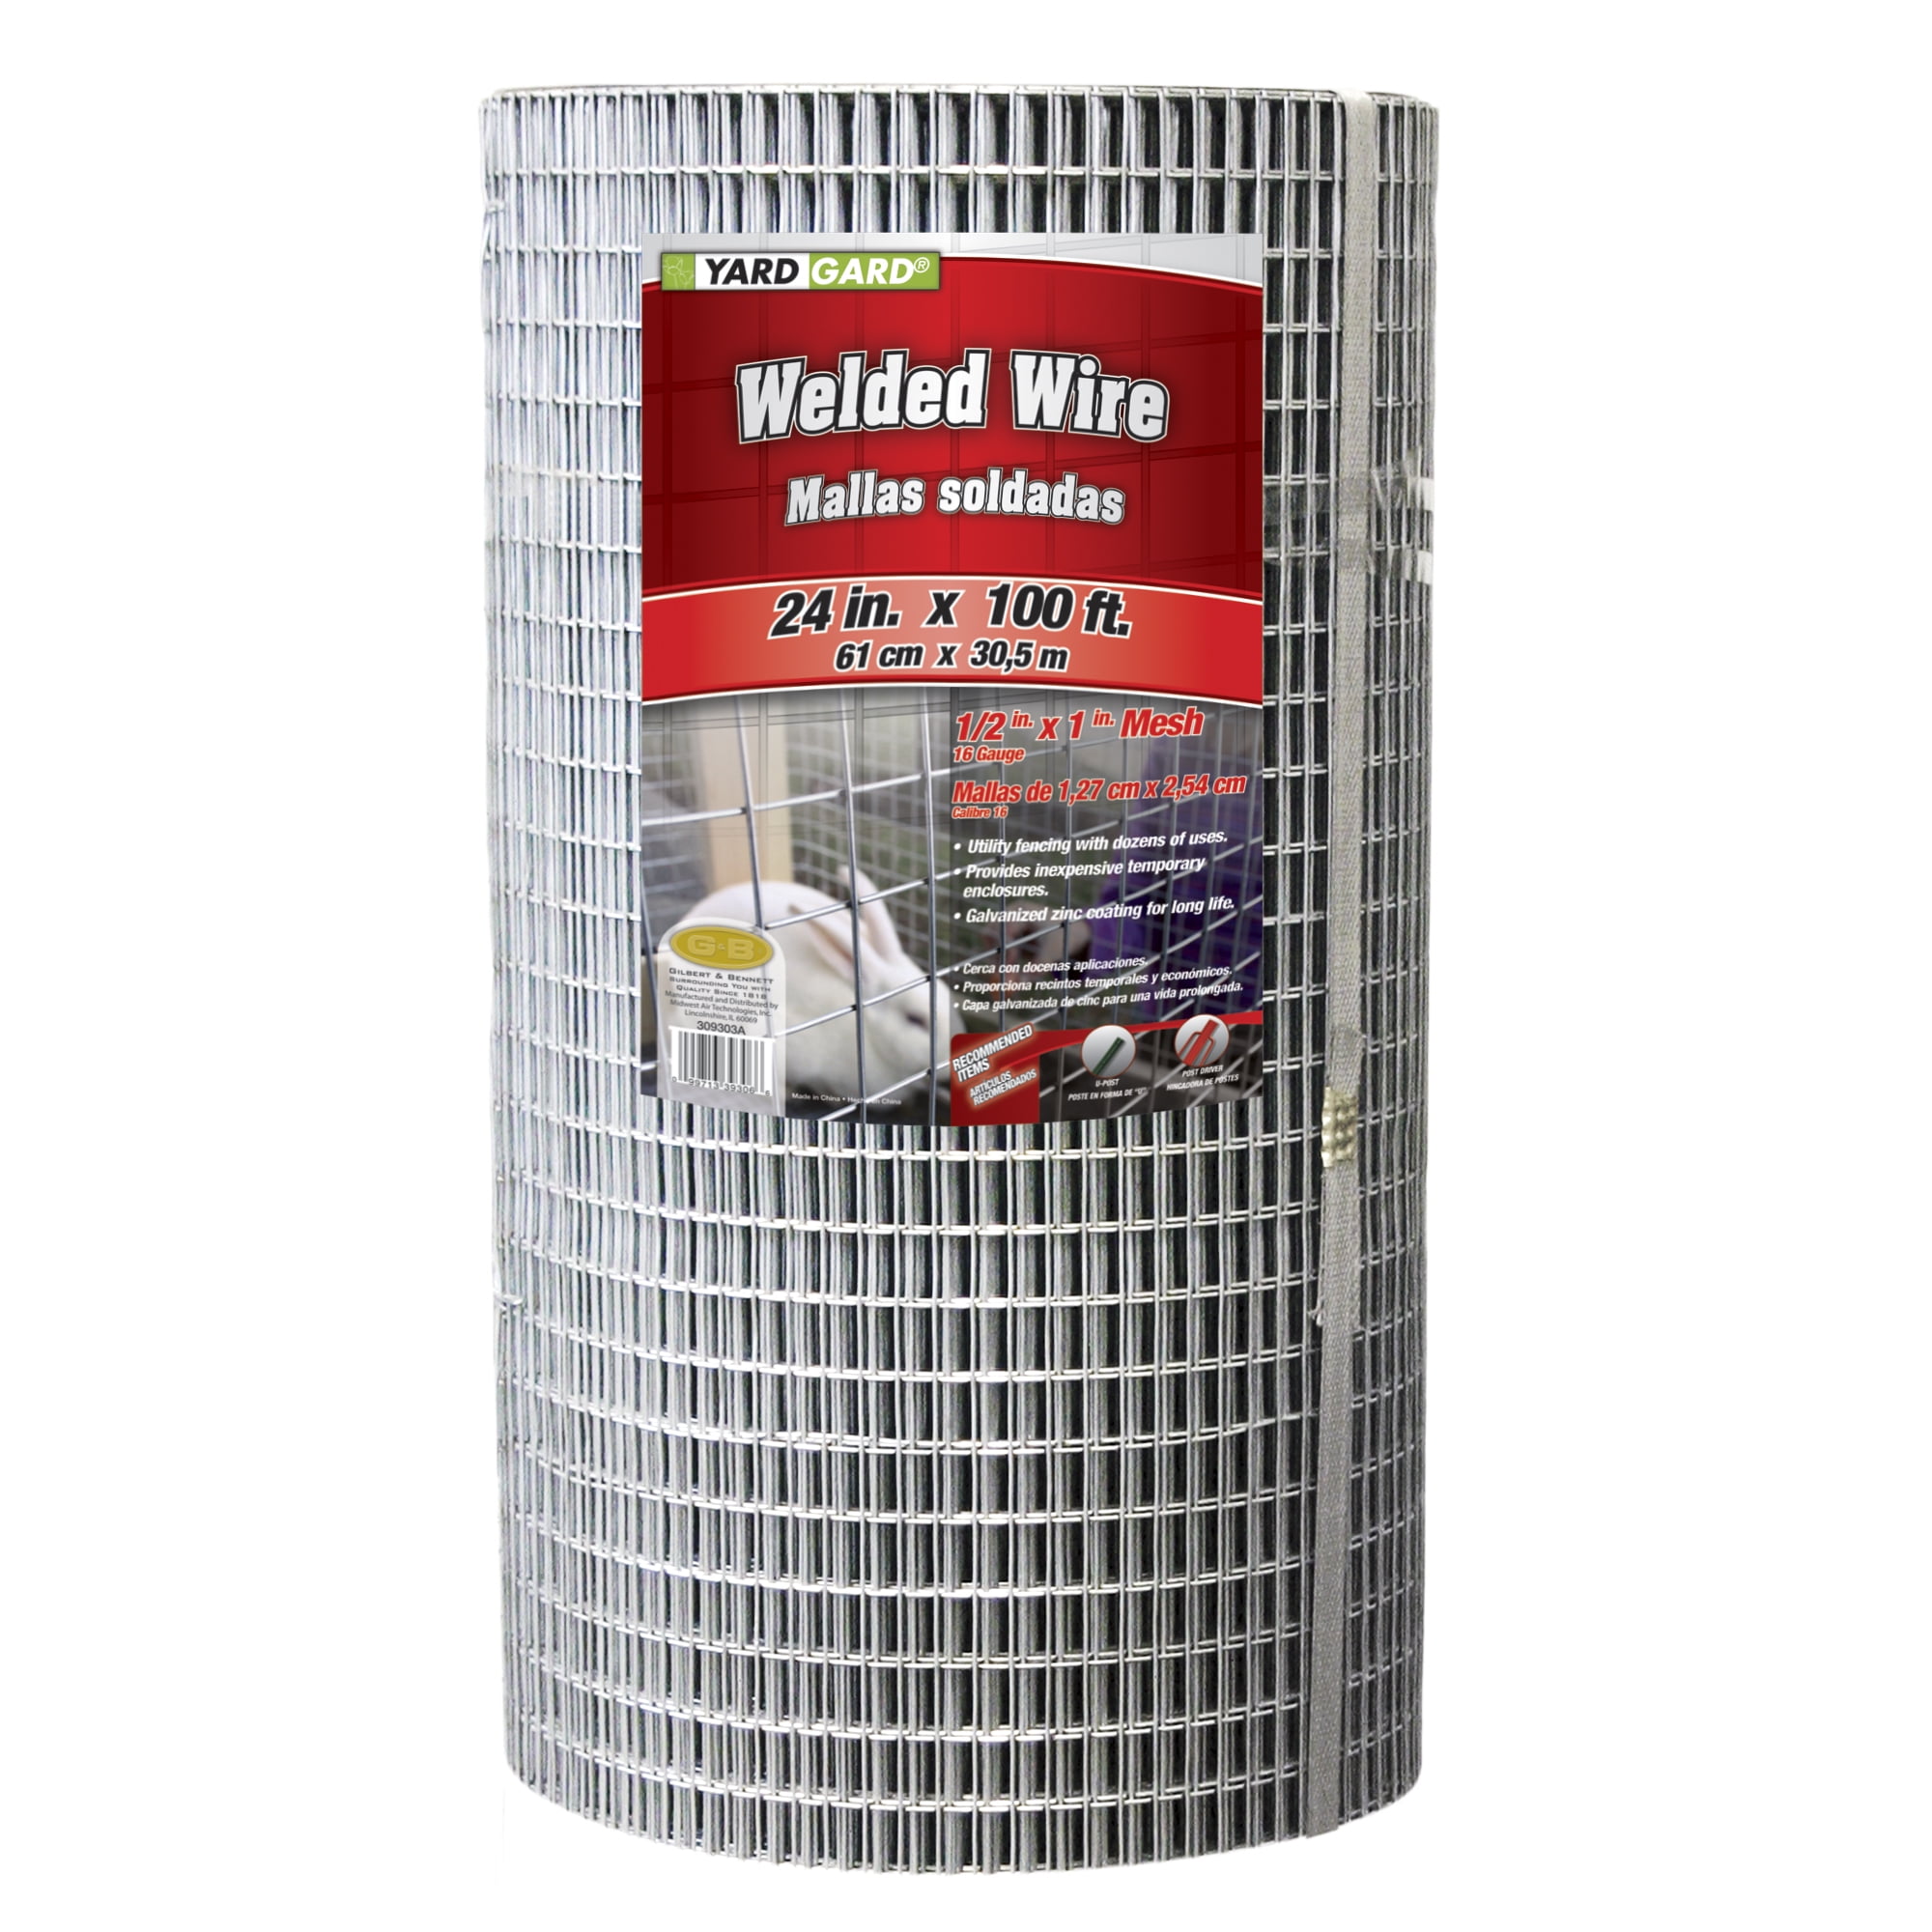 Yardgard 1 Inch By 2 Inch Mesh 24 Inch By 25 Foot Galvanized Welded Wire Fence 